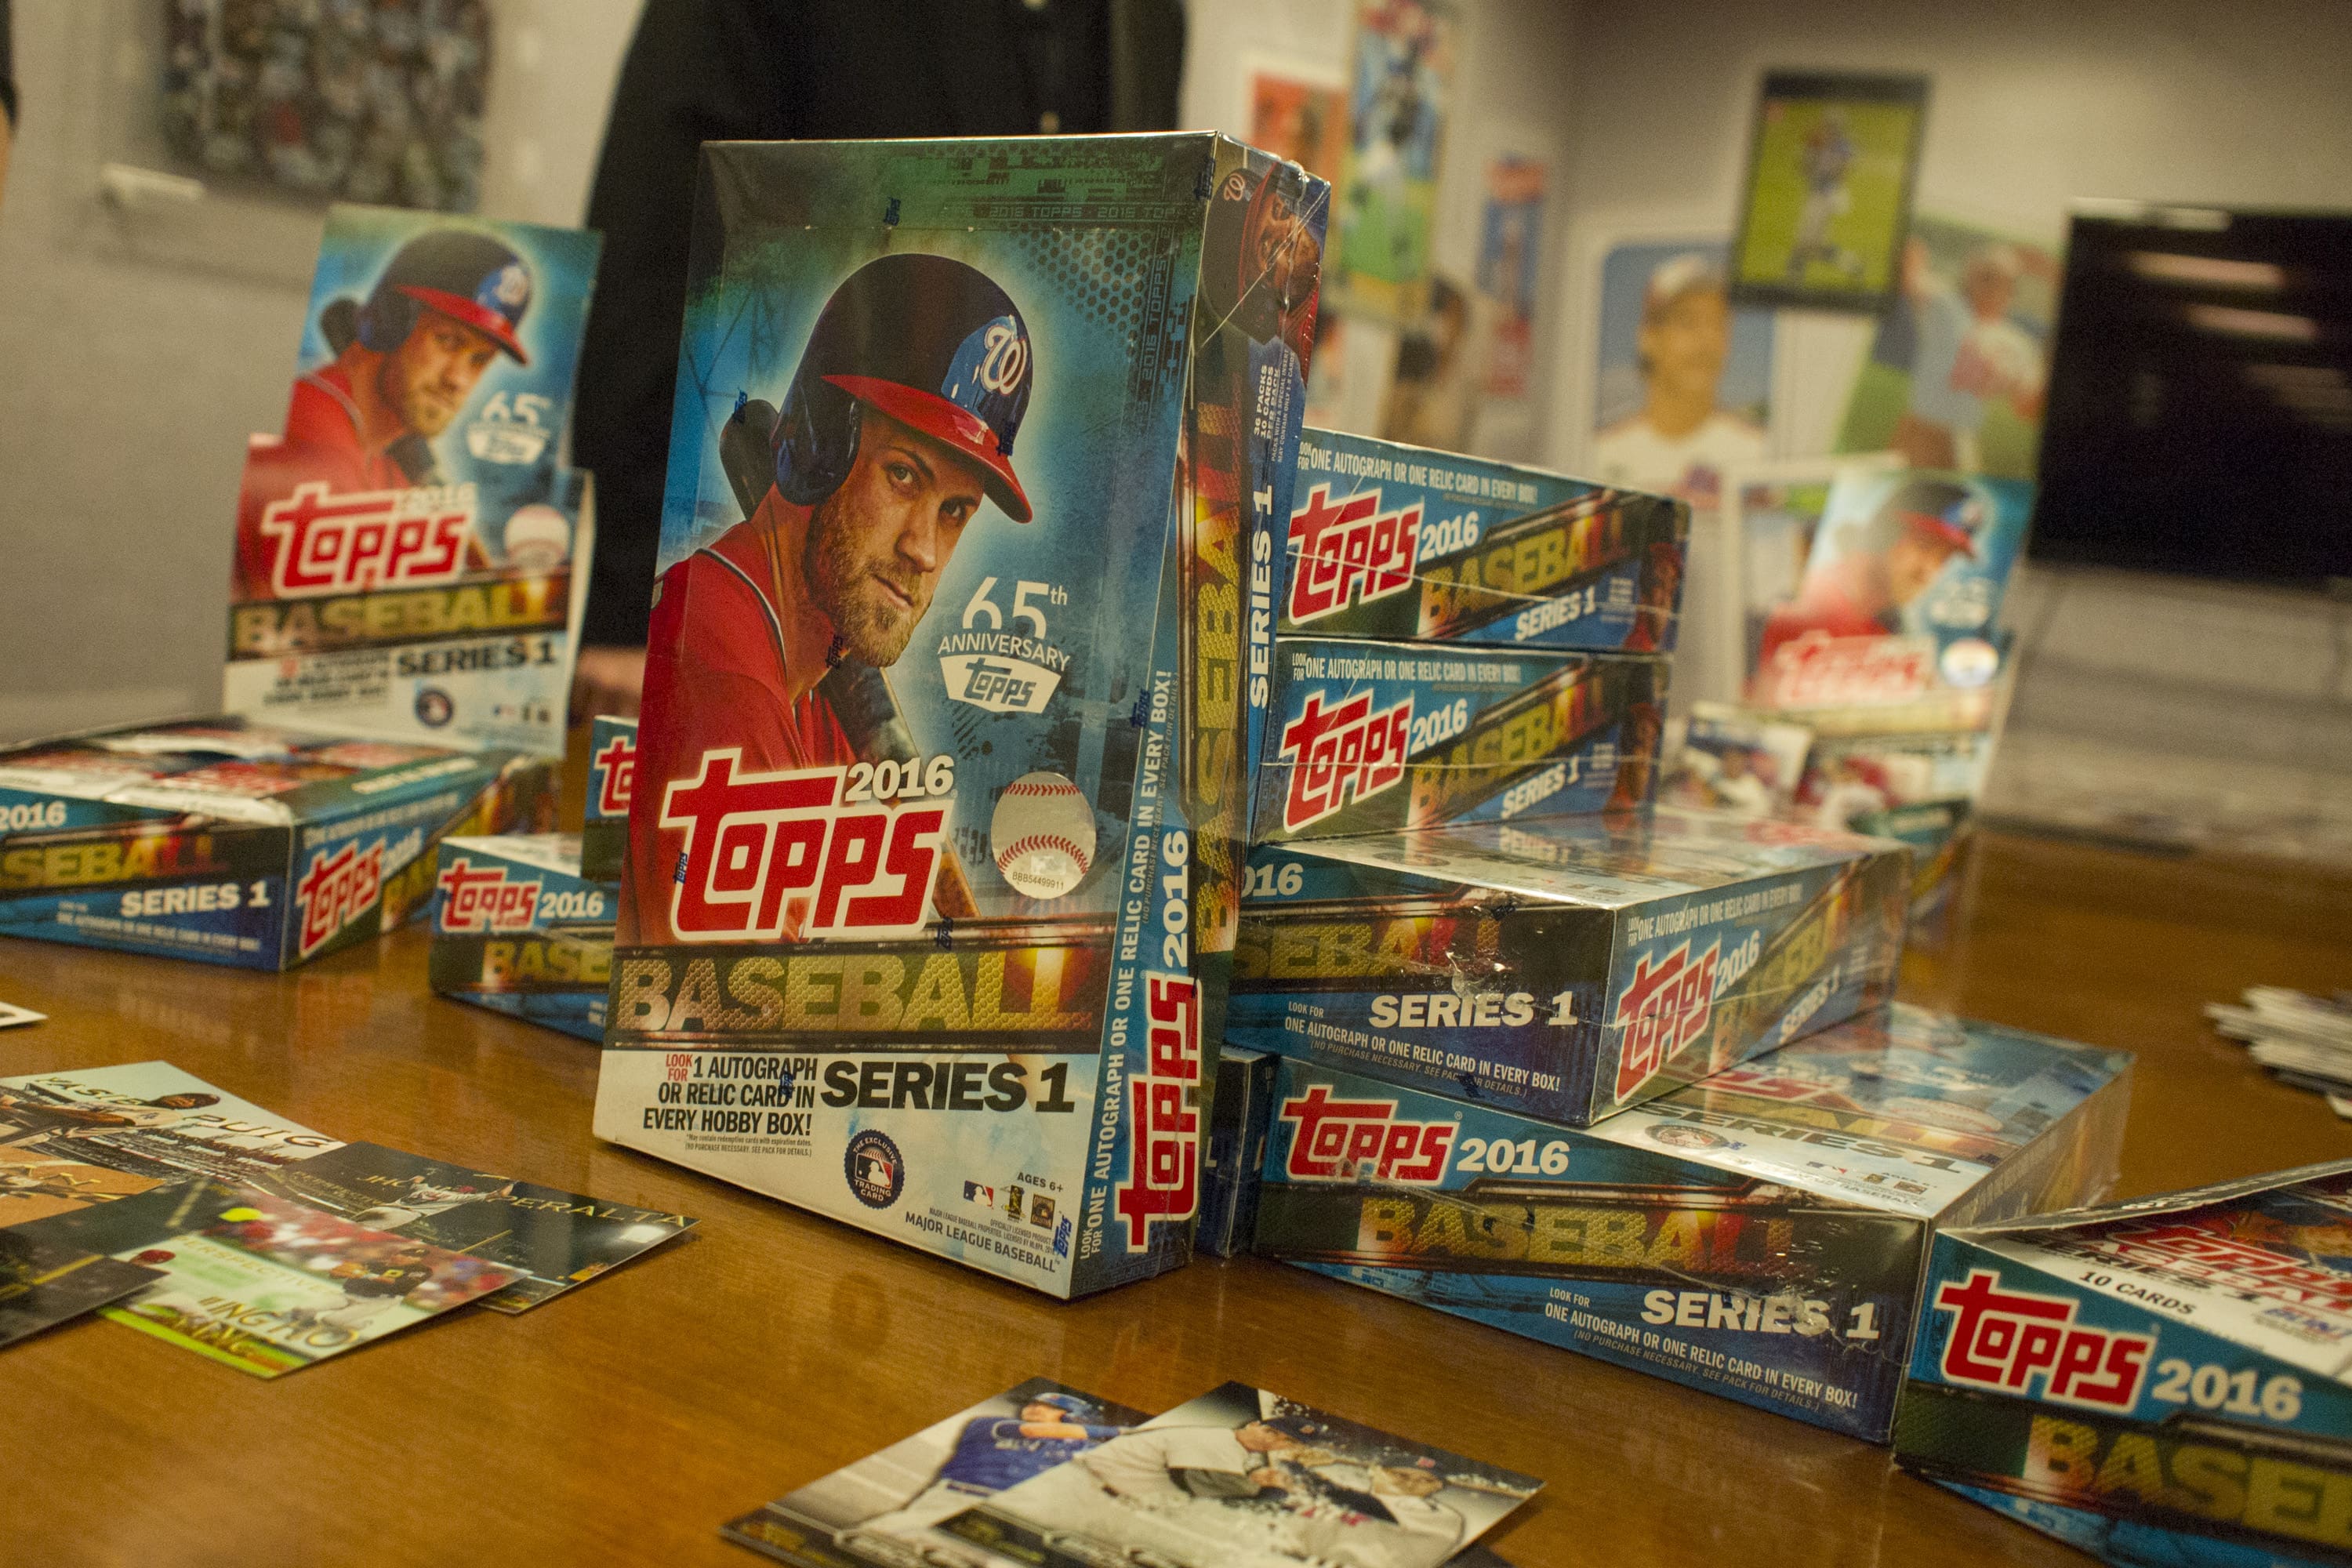 Topps SPAC merger with Mudrick Capital dies because MLB killed 70-year-old trading card deal